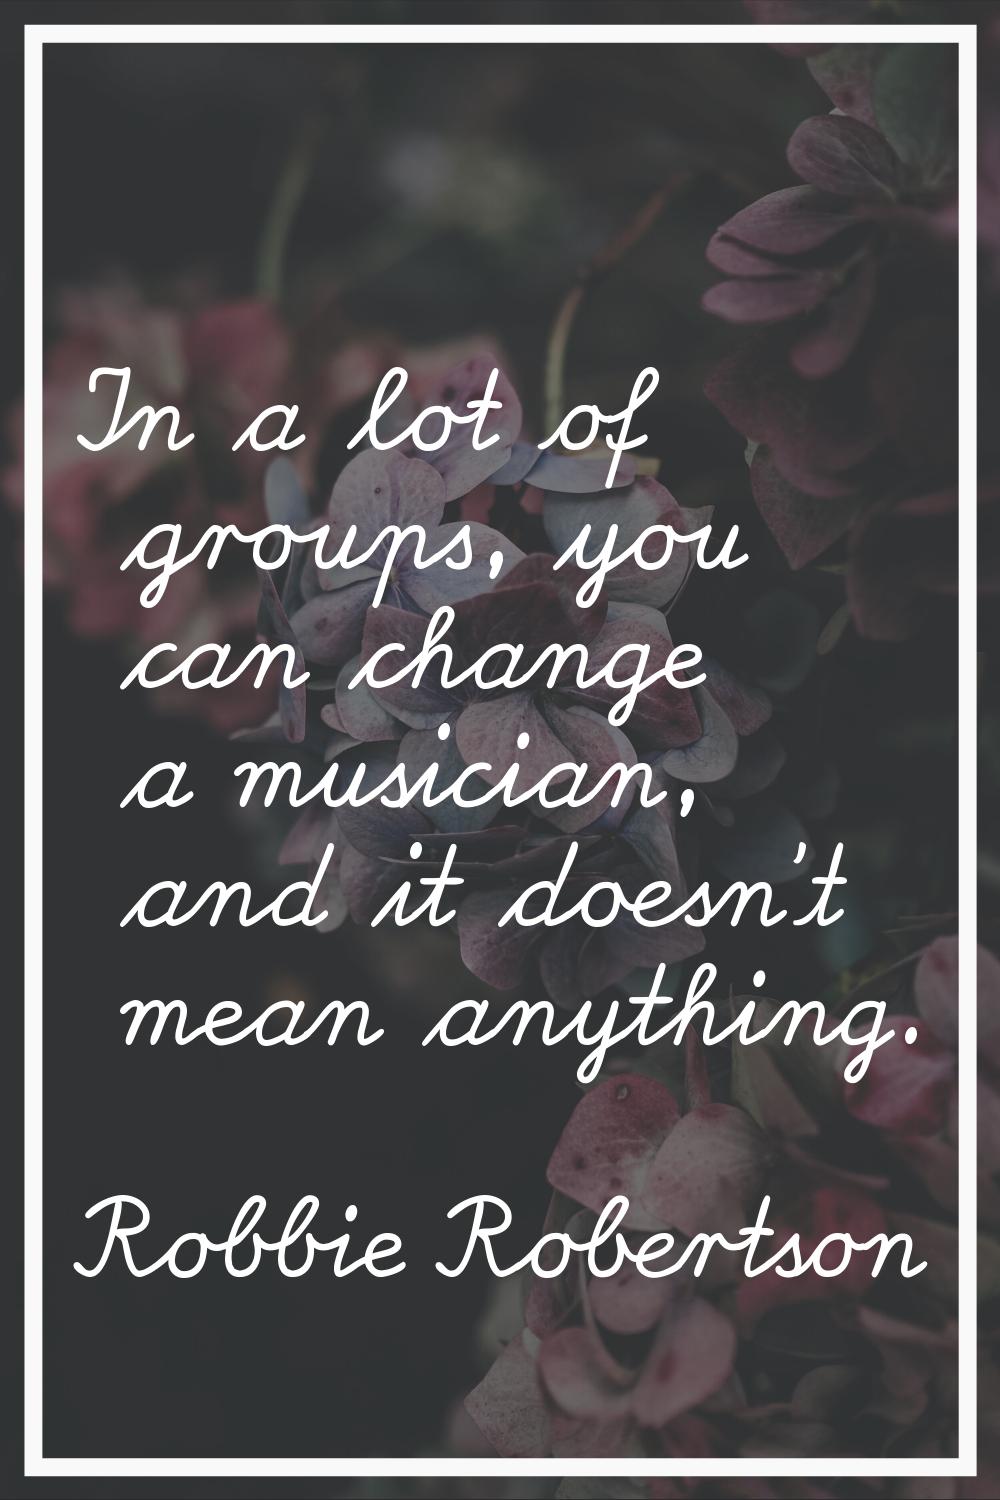 In a lot of groups, you can change a musician, and it doesn't mean anything.